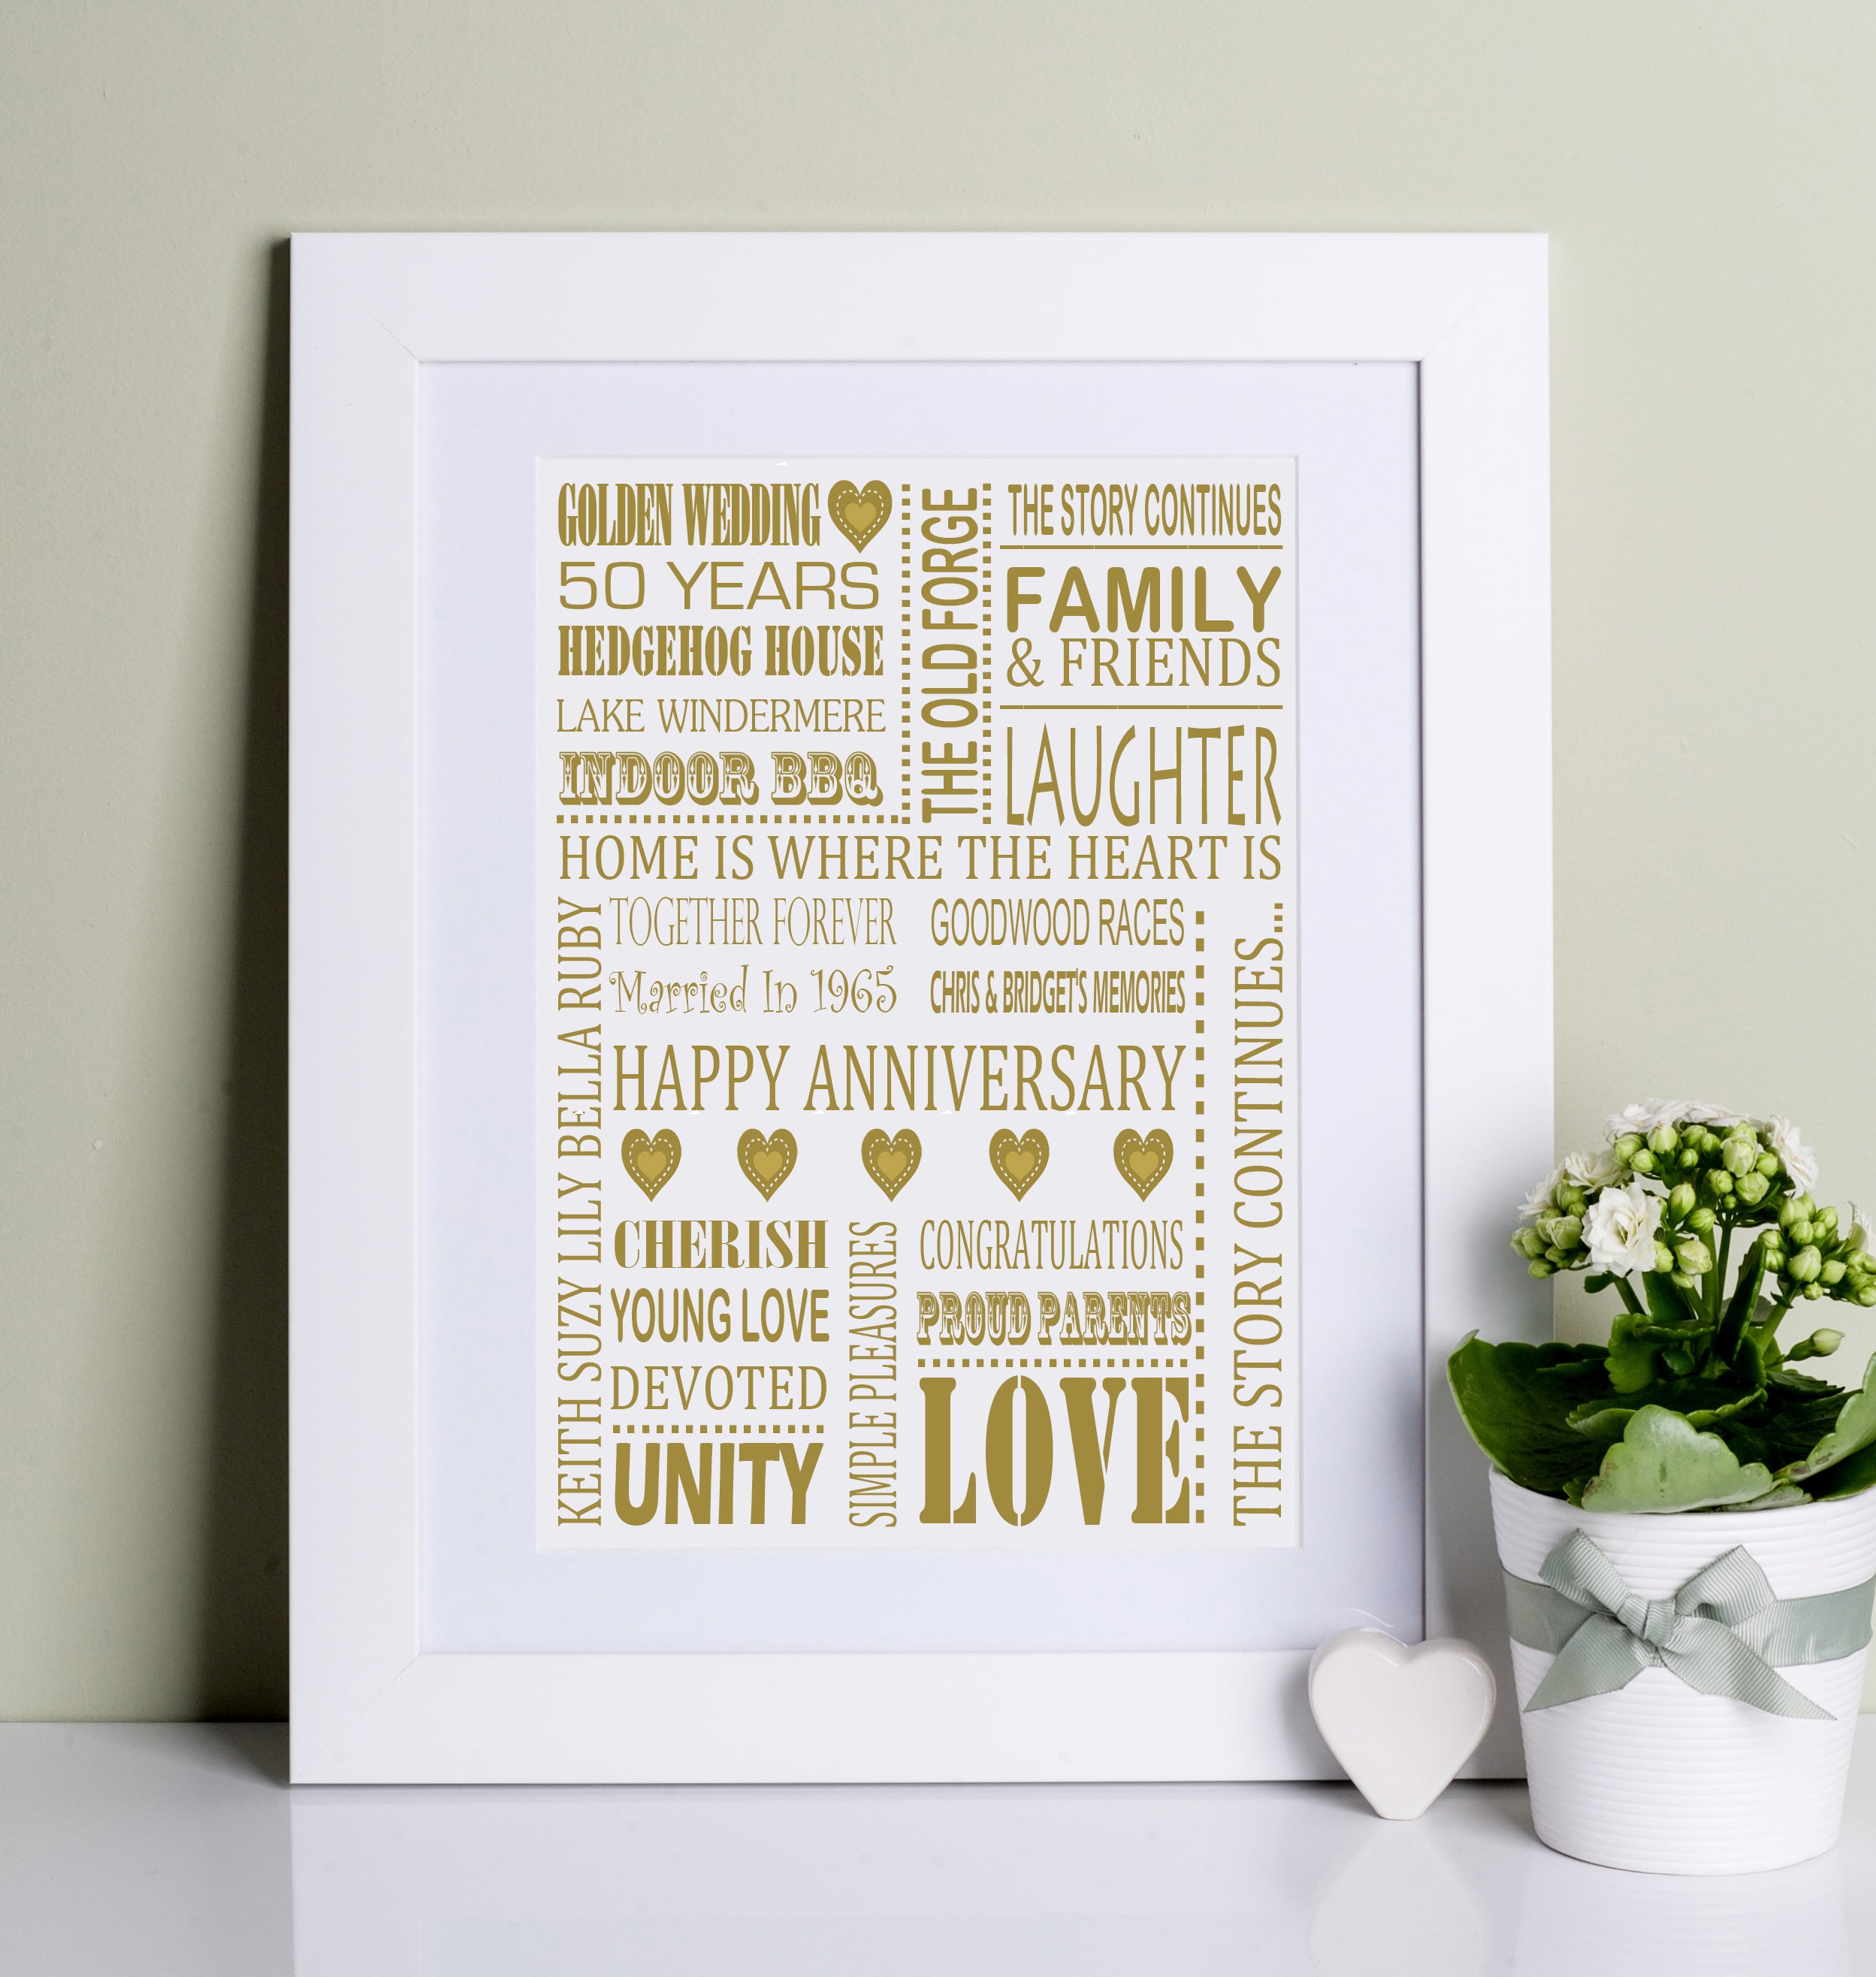 Best Quality Anniversary Gift For Couple Indian | Gift Items For Anniversary  Gift For Couple Indian | Unique Anniversary Gift For Couple Indian